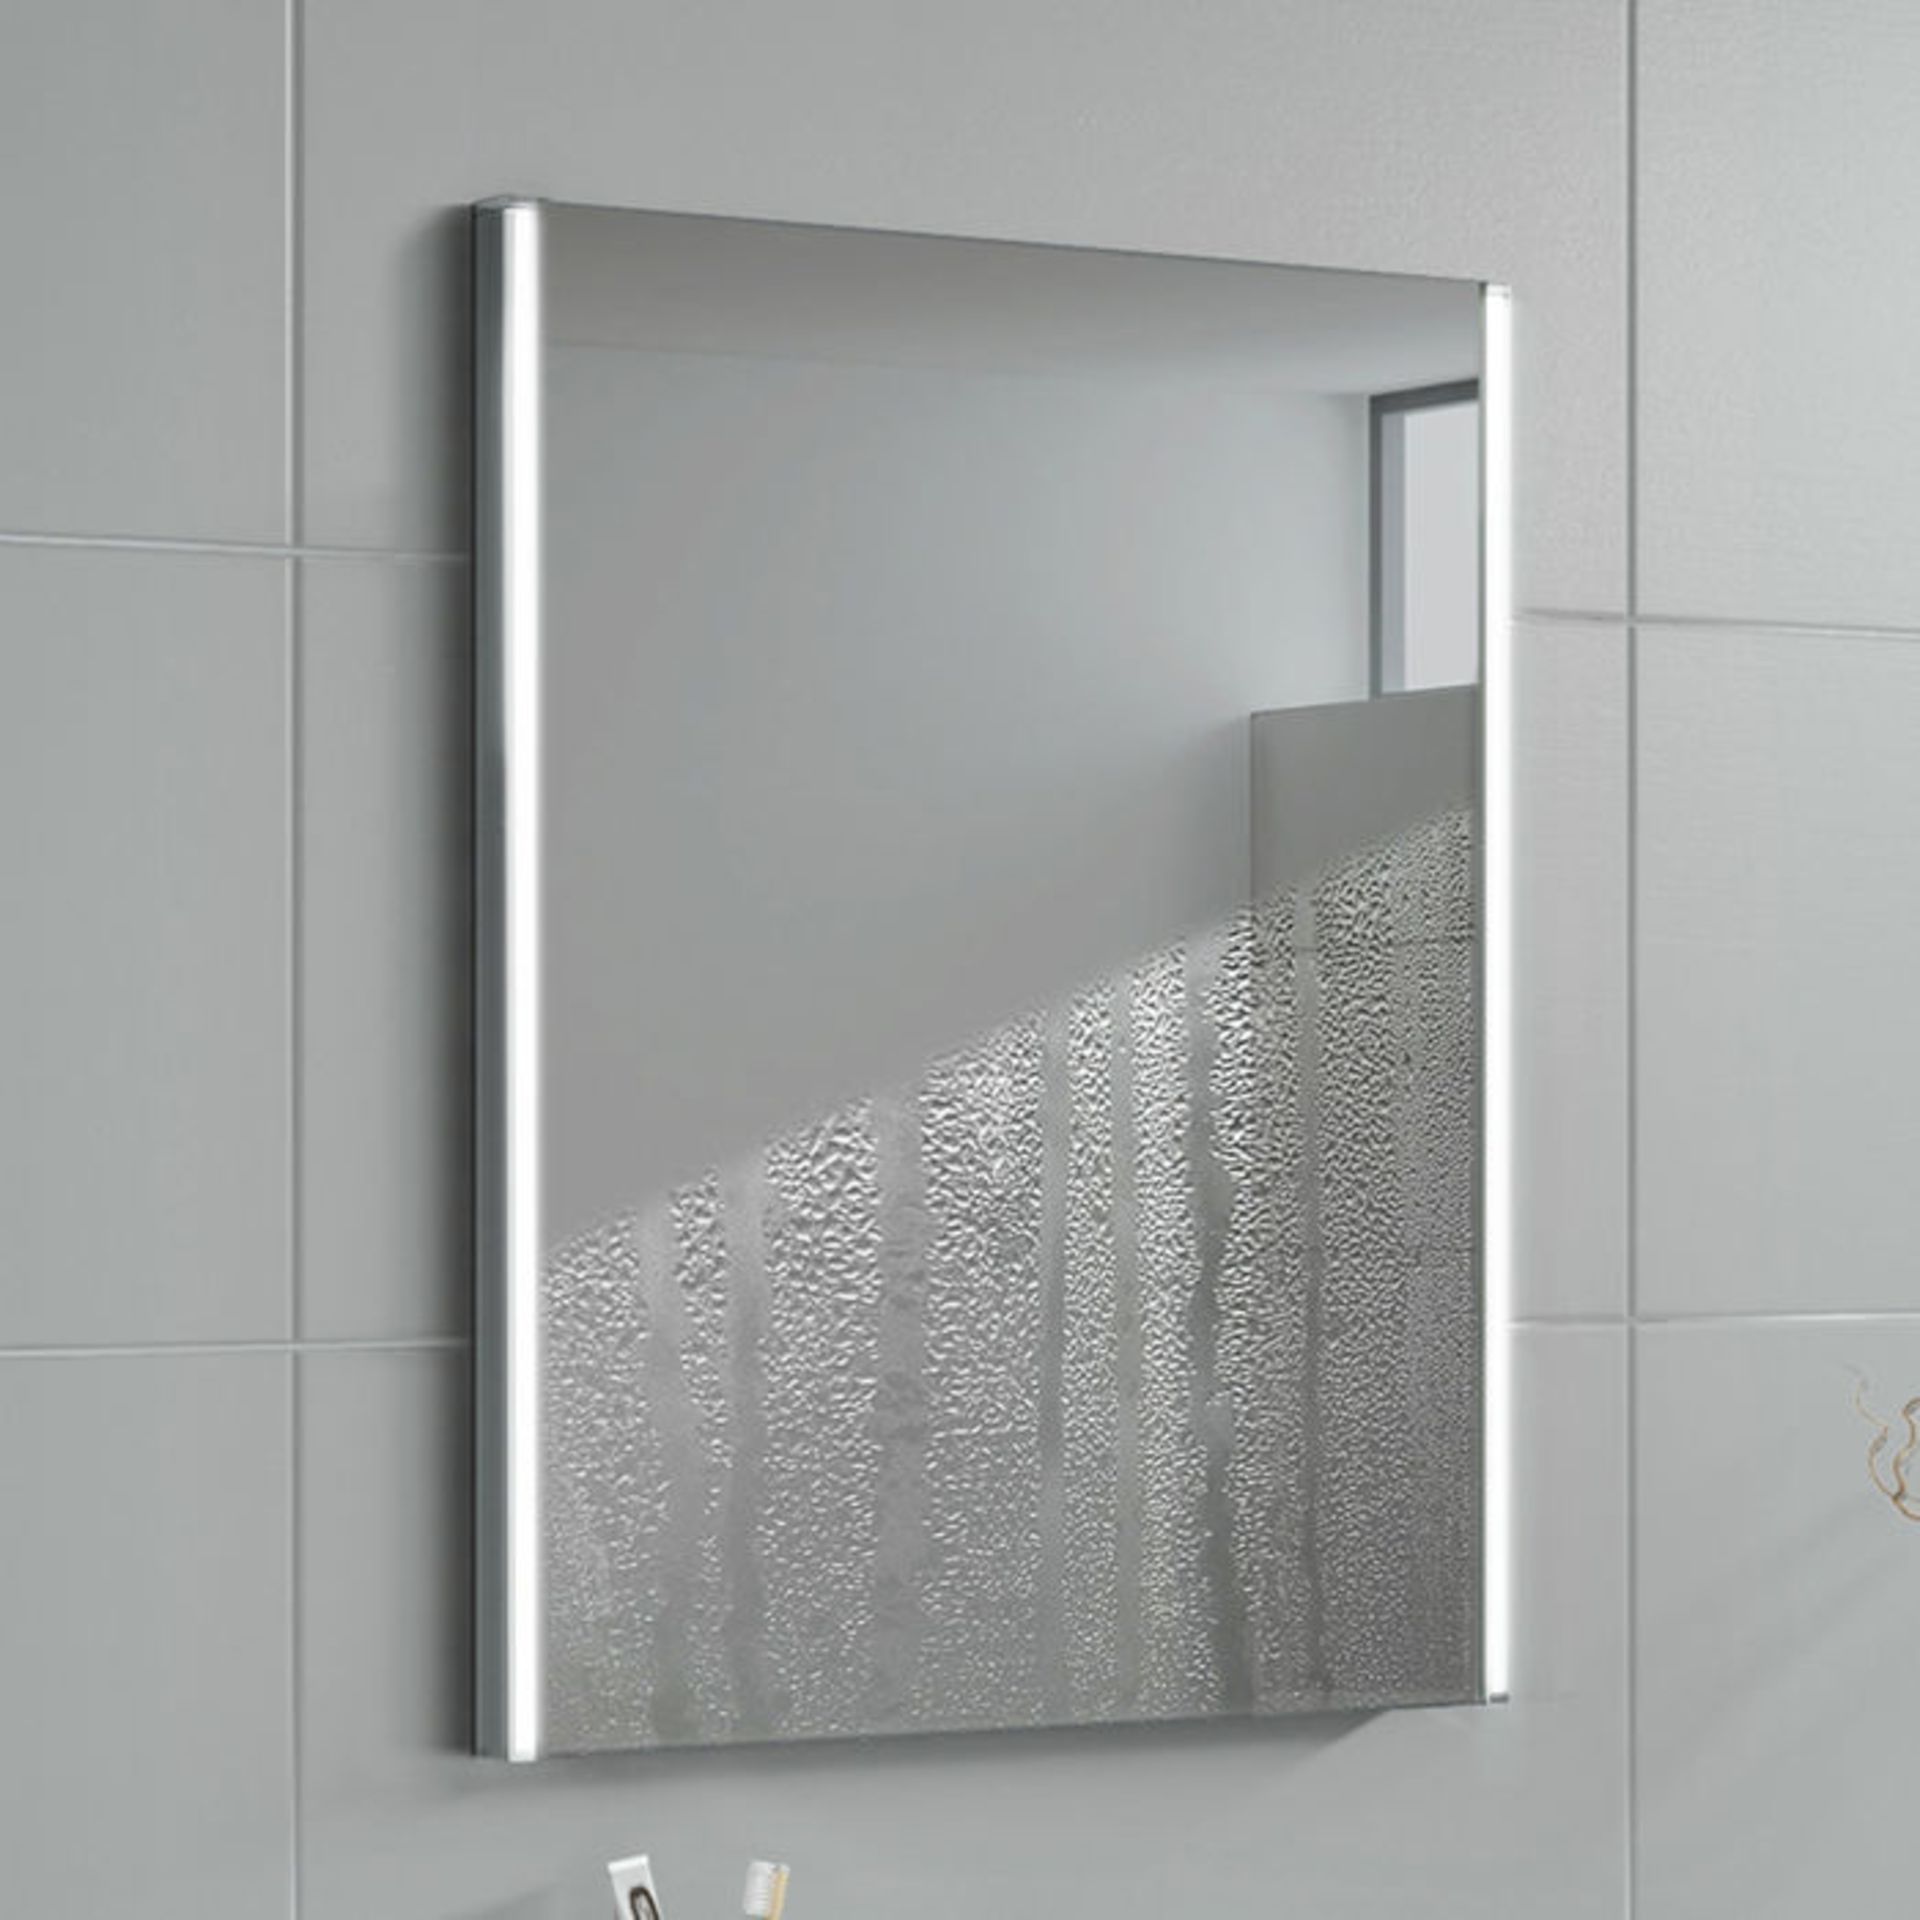 (LP25) 450x600mm Denver Illuminated LED Mirror. RRP £349.99. Energy efficient LED lighting with IP44 - Image 4 of 6